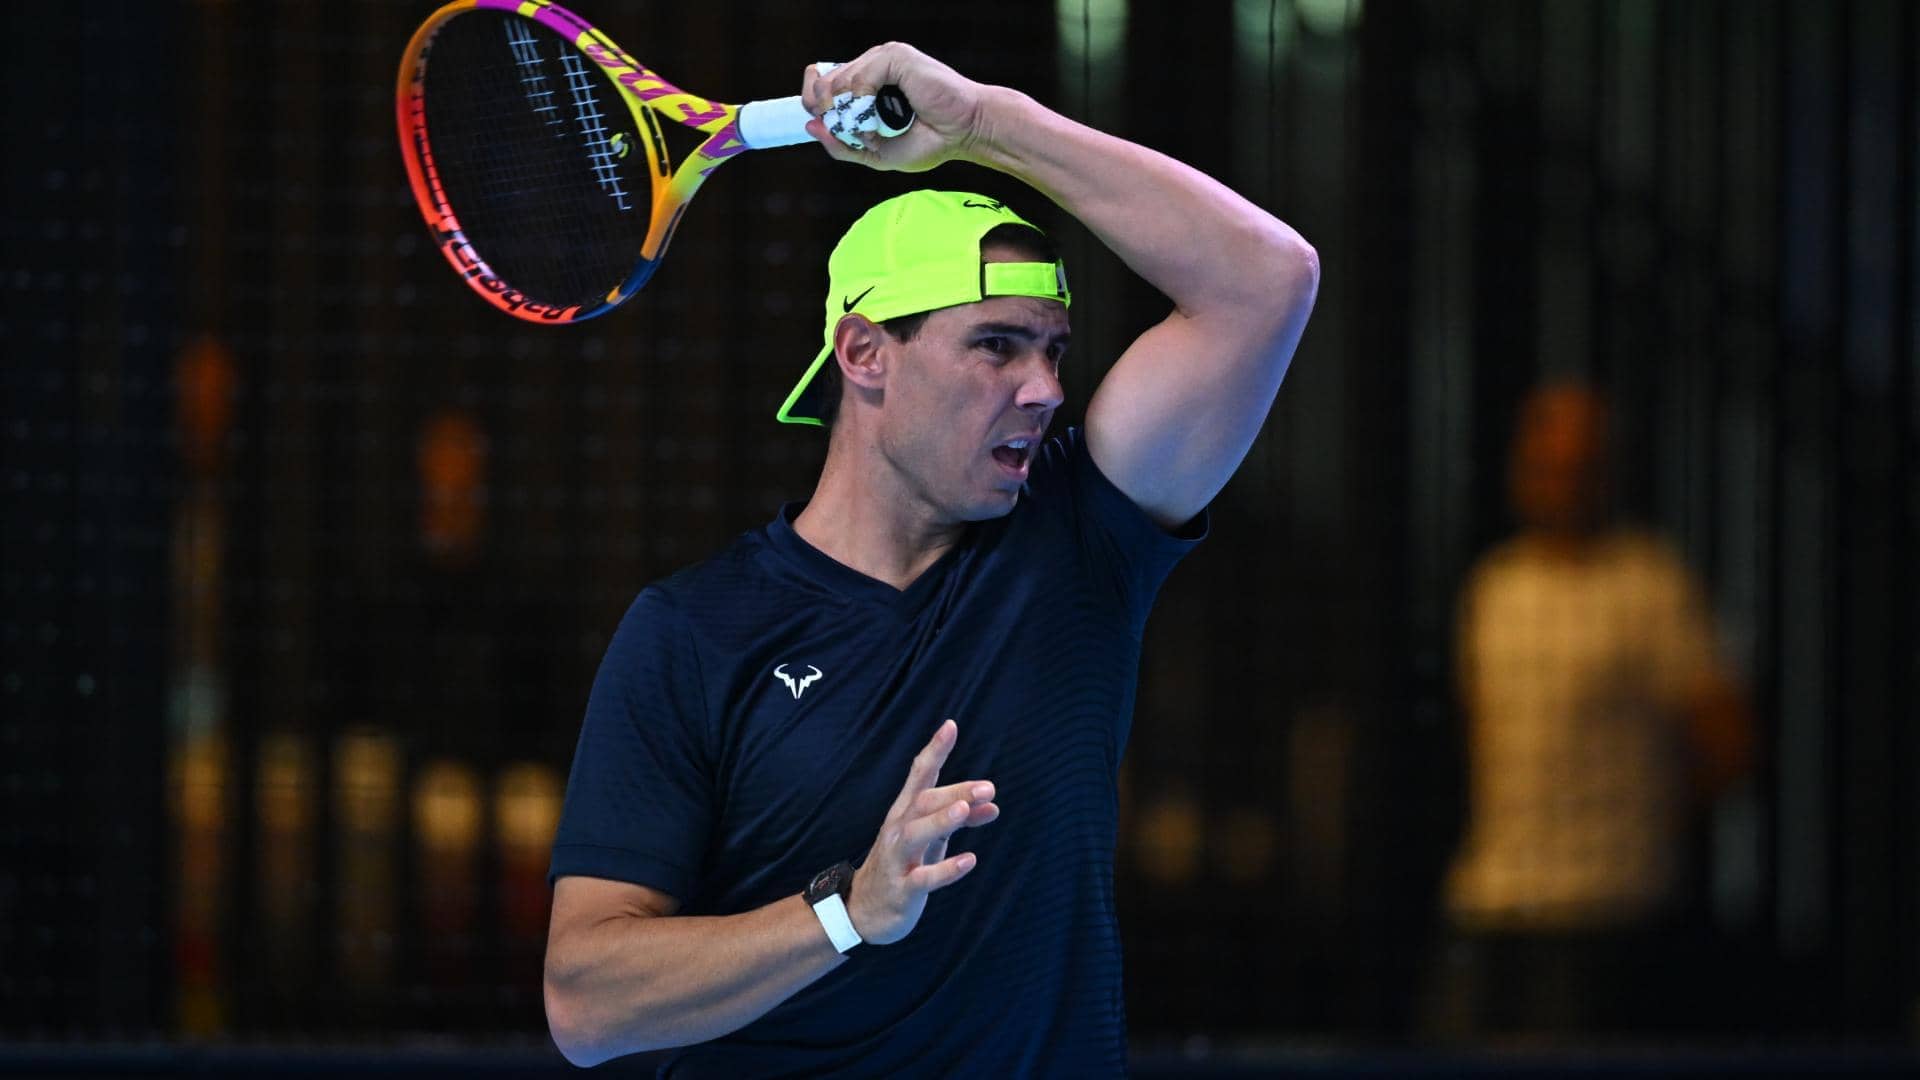 Rafael Nadal seeks a third chance at a title match at the Nitto ATP Finals.